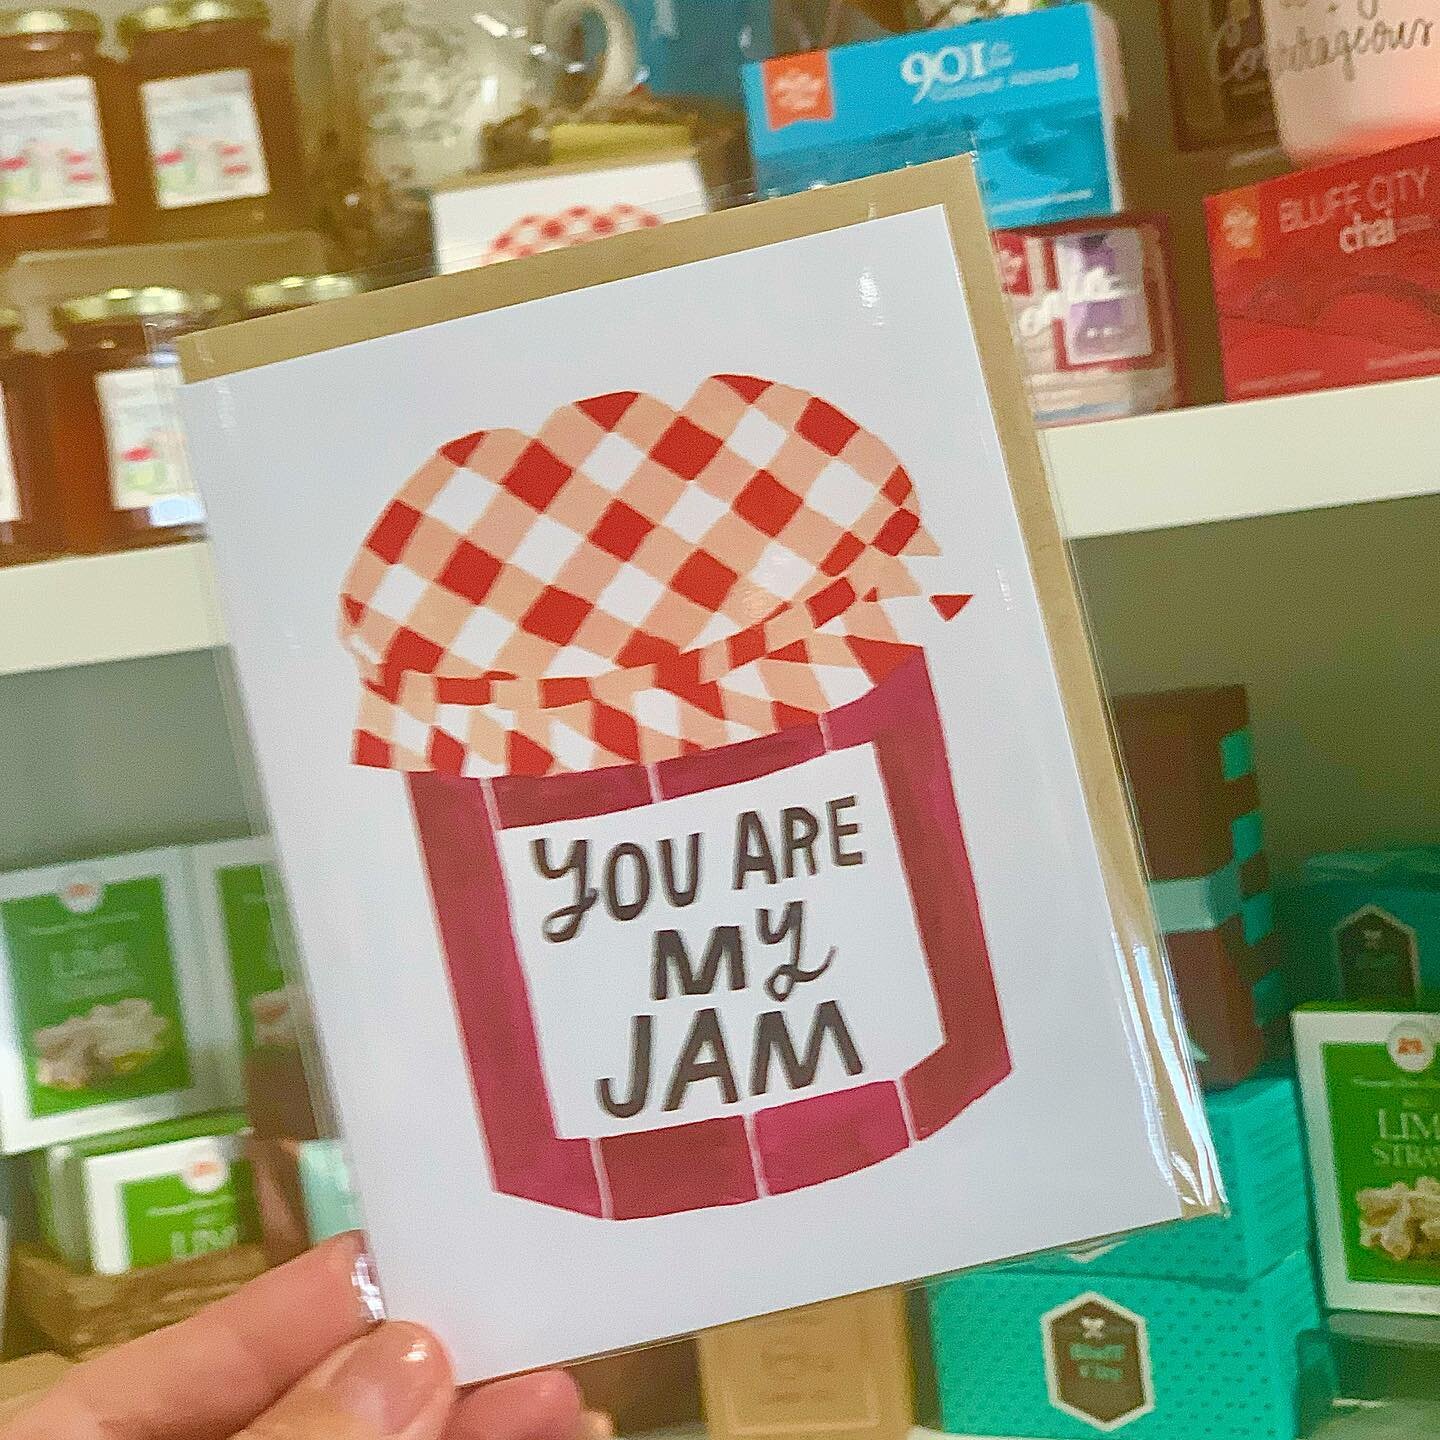 You&rsquo;re my jam!!!❤️
 
901-766-6746
SUMMER Hours&hellip;
Tuesday-Saturday 11-4
Monday by Appointment

#Social #Shoplocal #901 #cards #snailmail #thoughtful